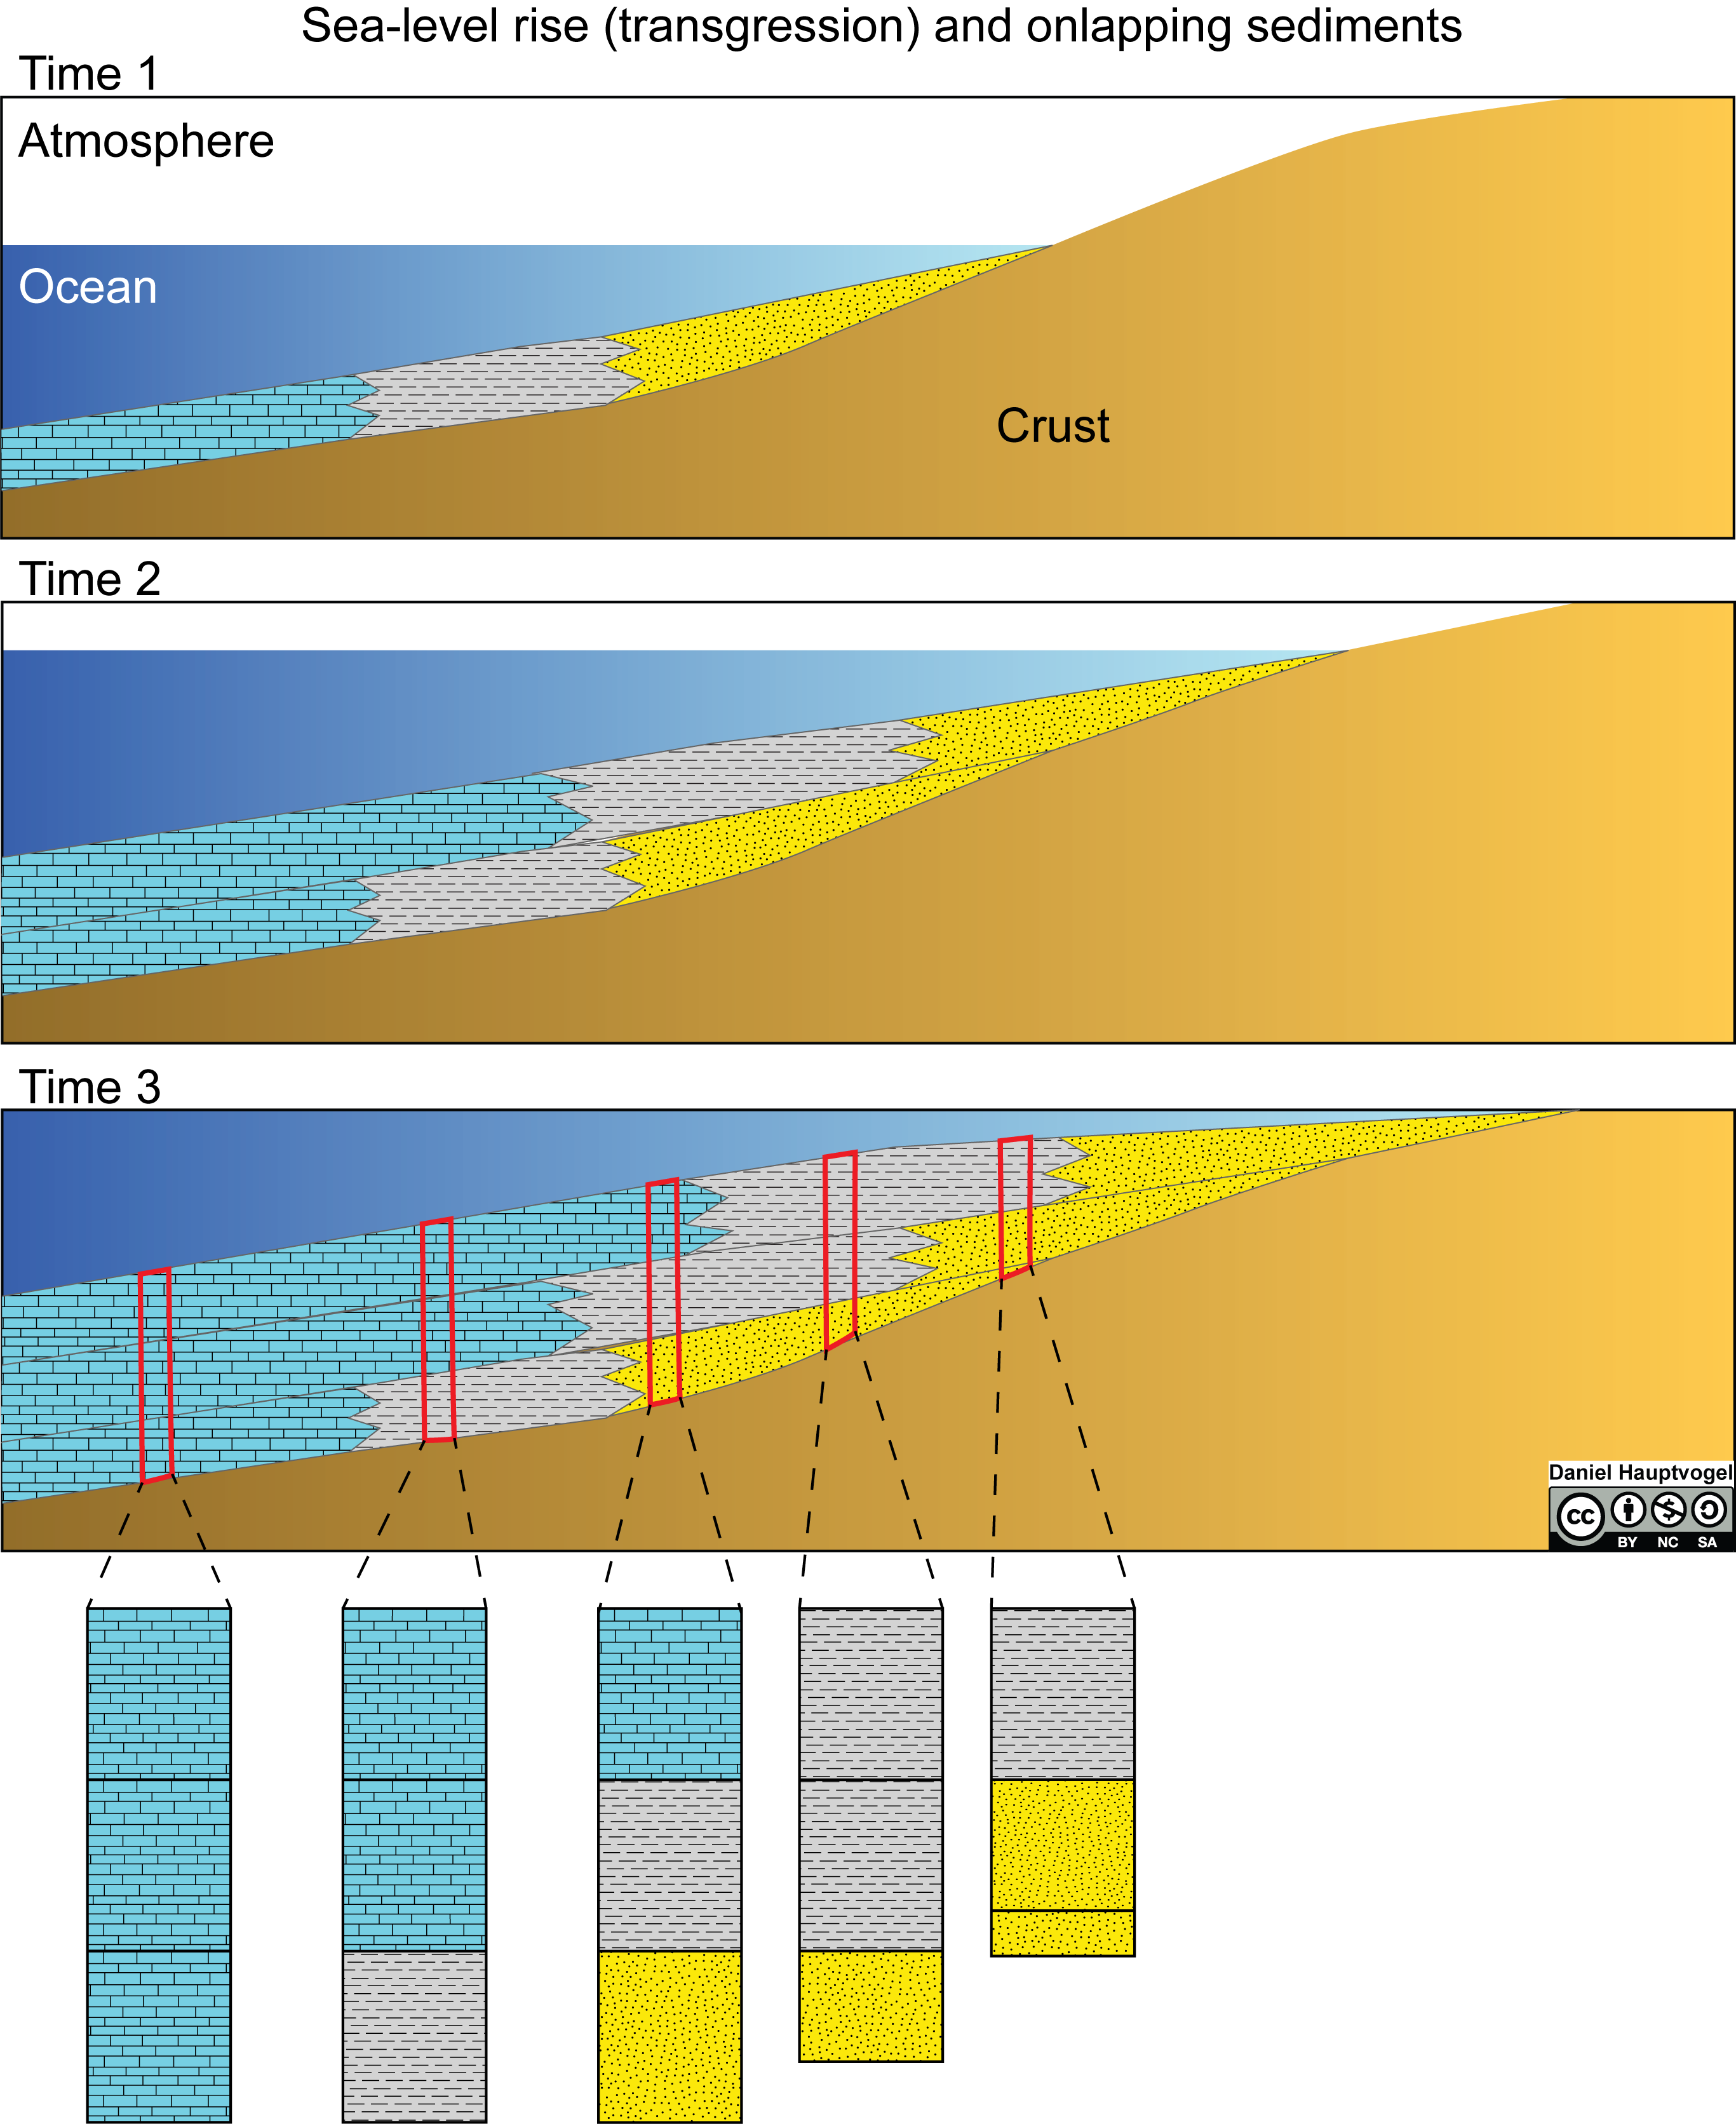 Three periods of transgression of sea-level rise at the edge of the continent. Below are several stratigraphic columns.